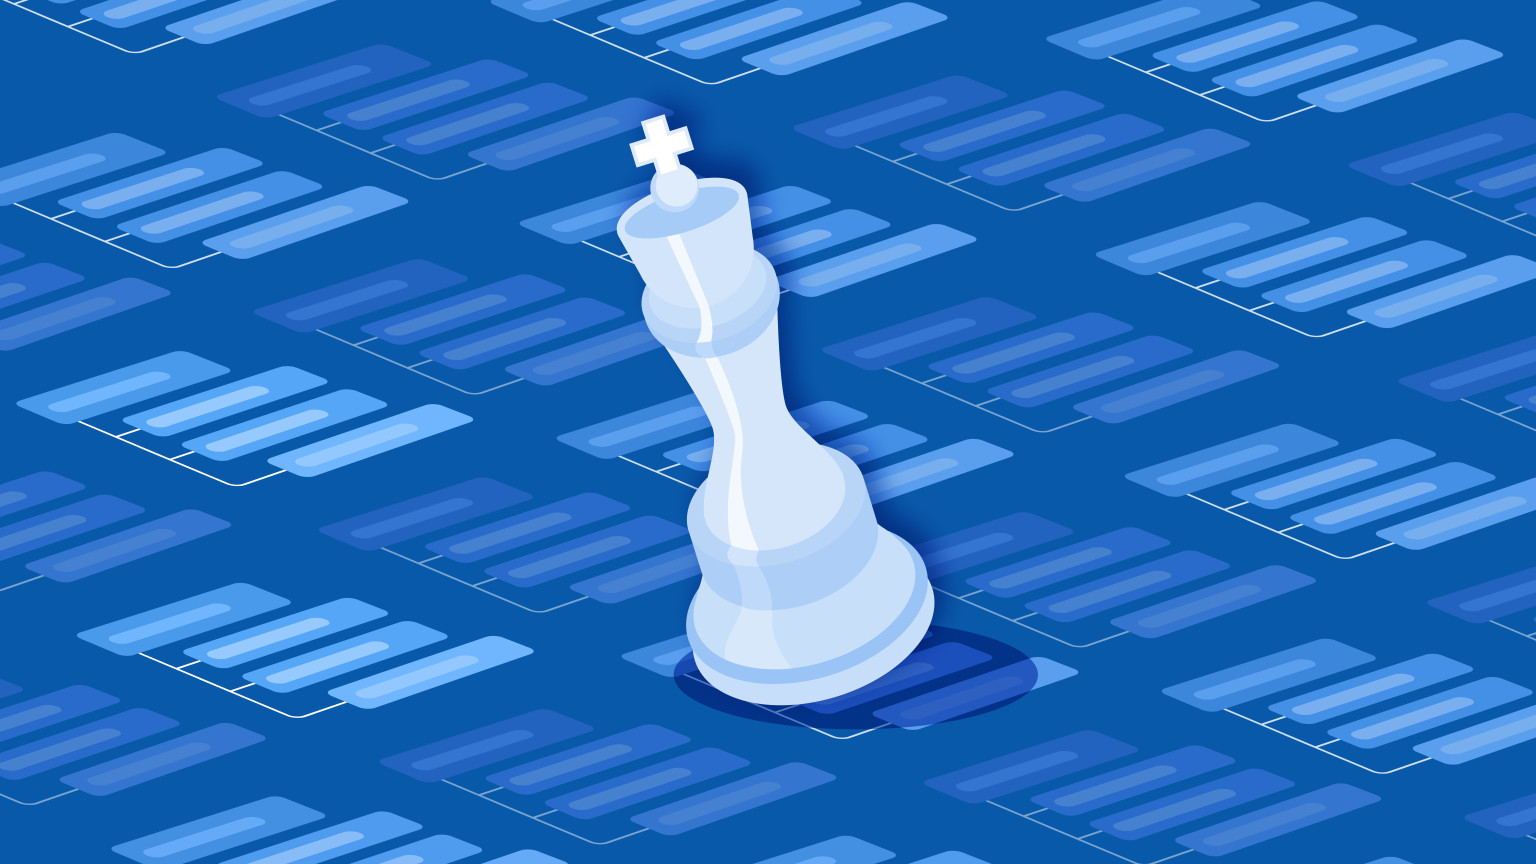 Illustration with a king chess piece moving across a patterned background, representing content modeling strategy